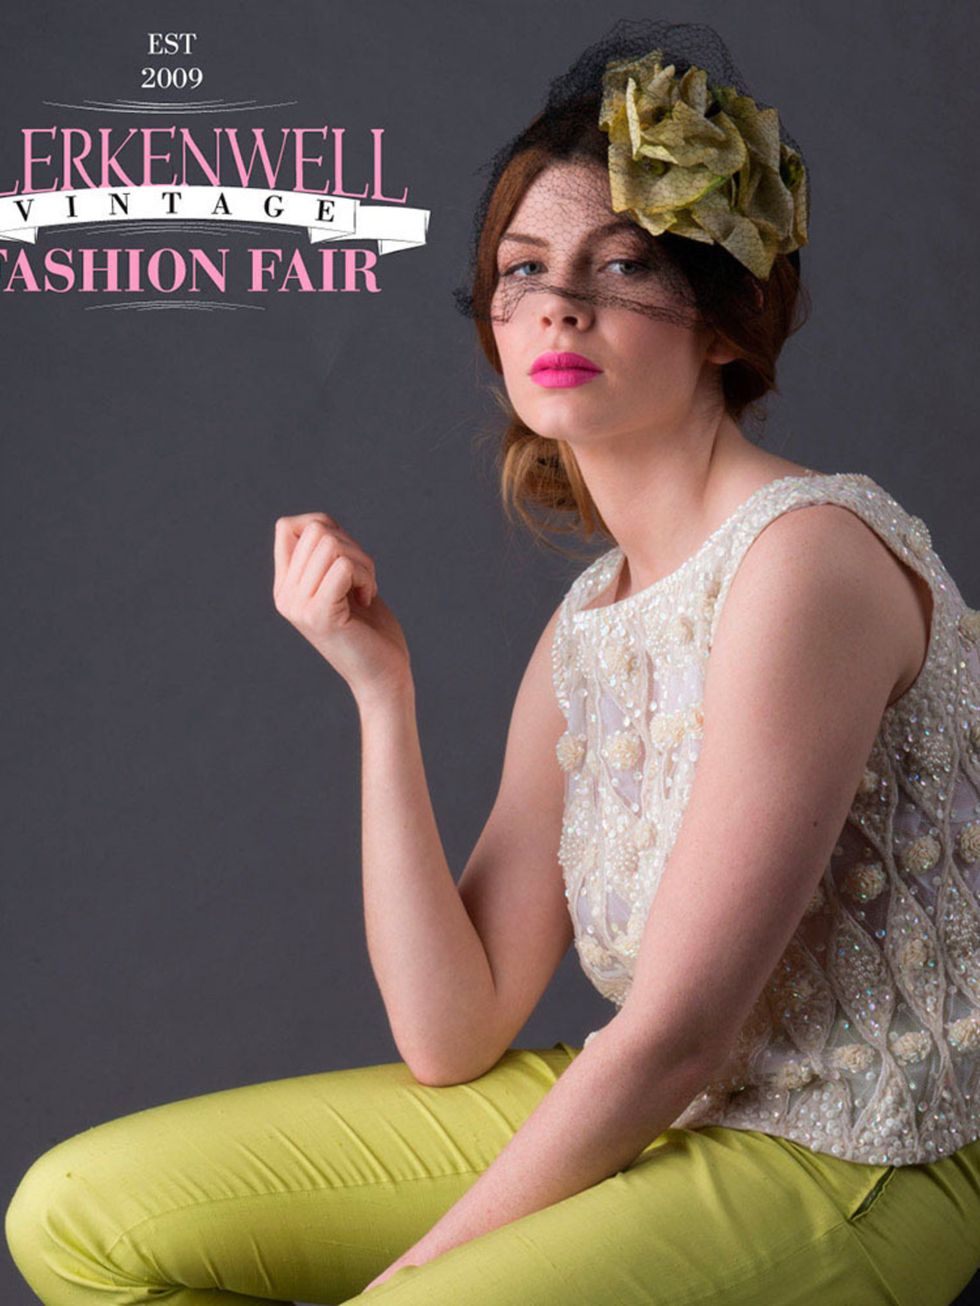 <p><strong>SHOPPING: Clerkenwell Vintage Fashion Fair</strong></p>

<p>Ever had occasion to say: Oh this? Its actually vintage? Feels just grand, doesnt it? Well, heres your chance to nonchalantly vintage-name drop a whole lot more, thanks to this w